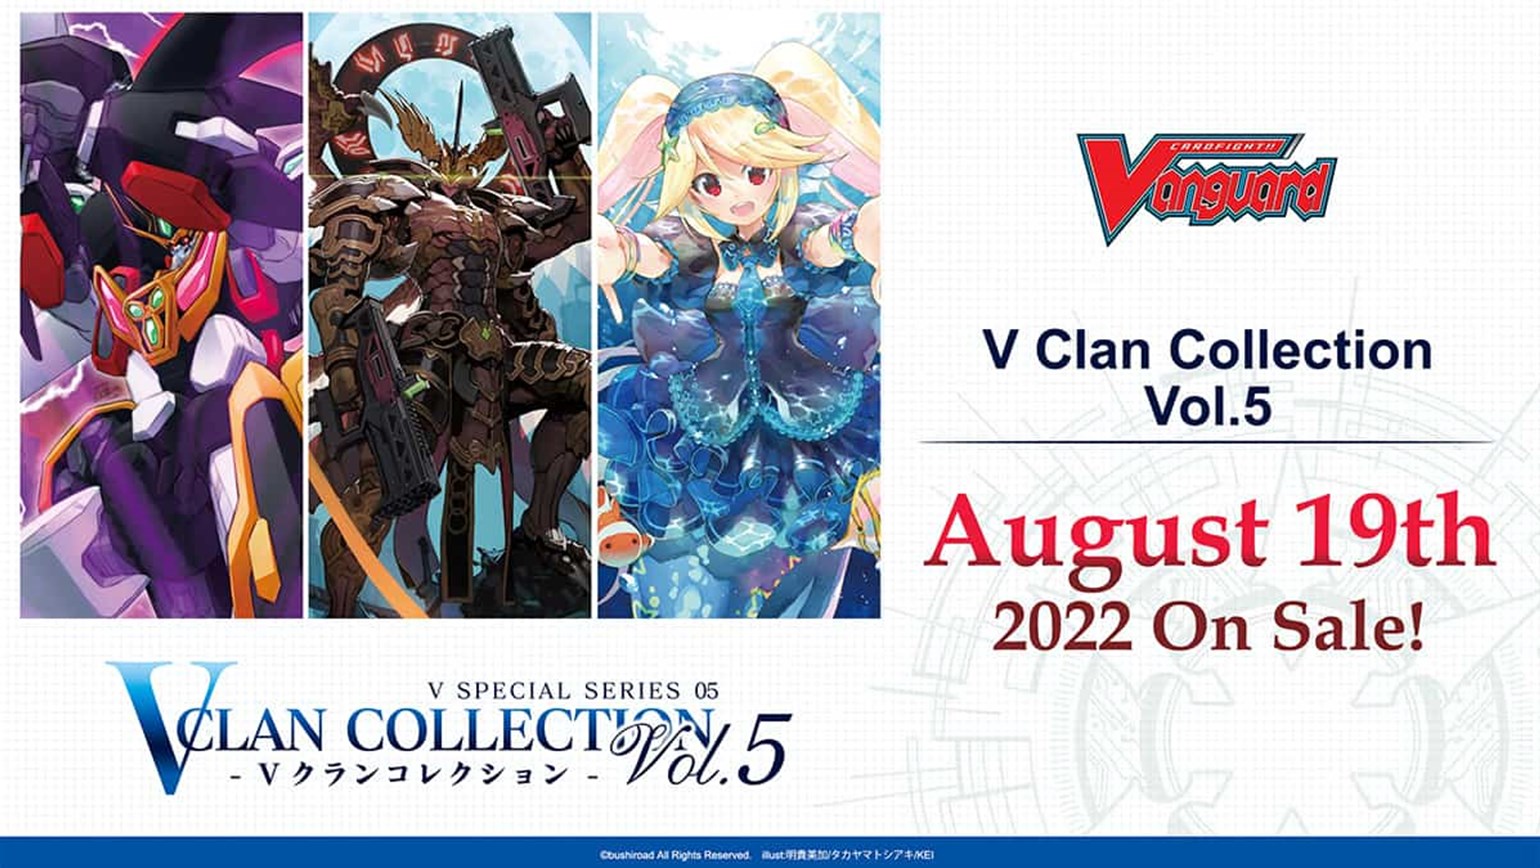 New English Edition overDress V Special Series 05: V Clan Collection Vol.5, Coming to Stores on August 19th!